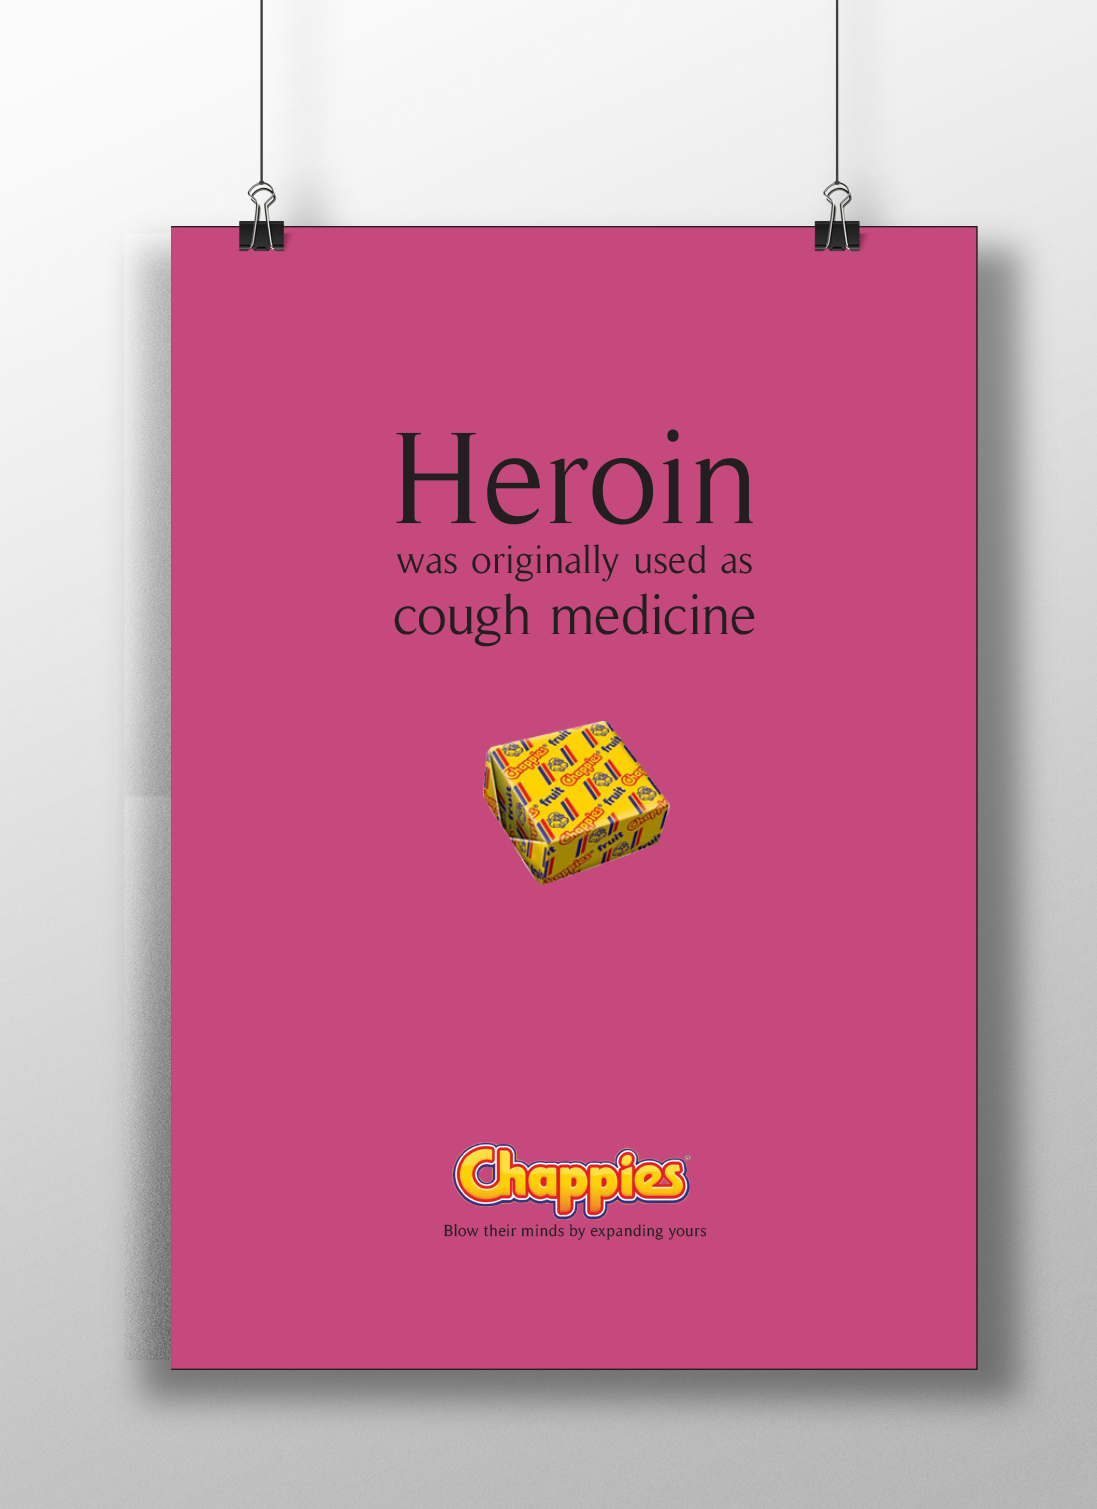 #chappies #bubblegum  #posters #Printad #magazine #ChewingGum #facts #Fact #artdirection